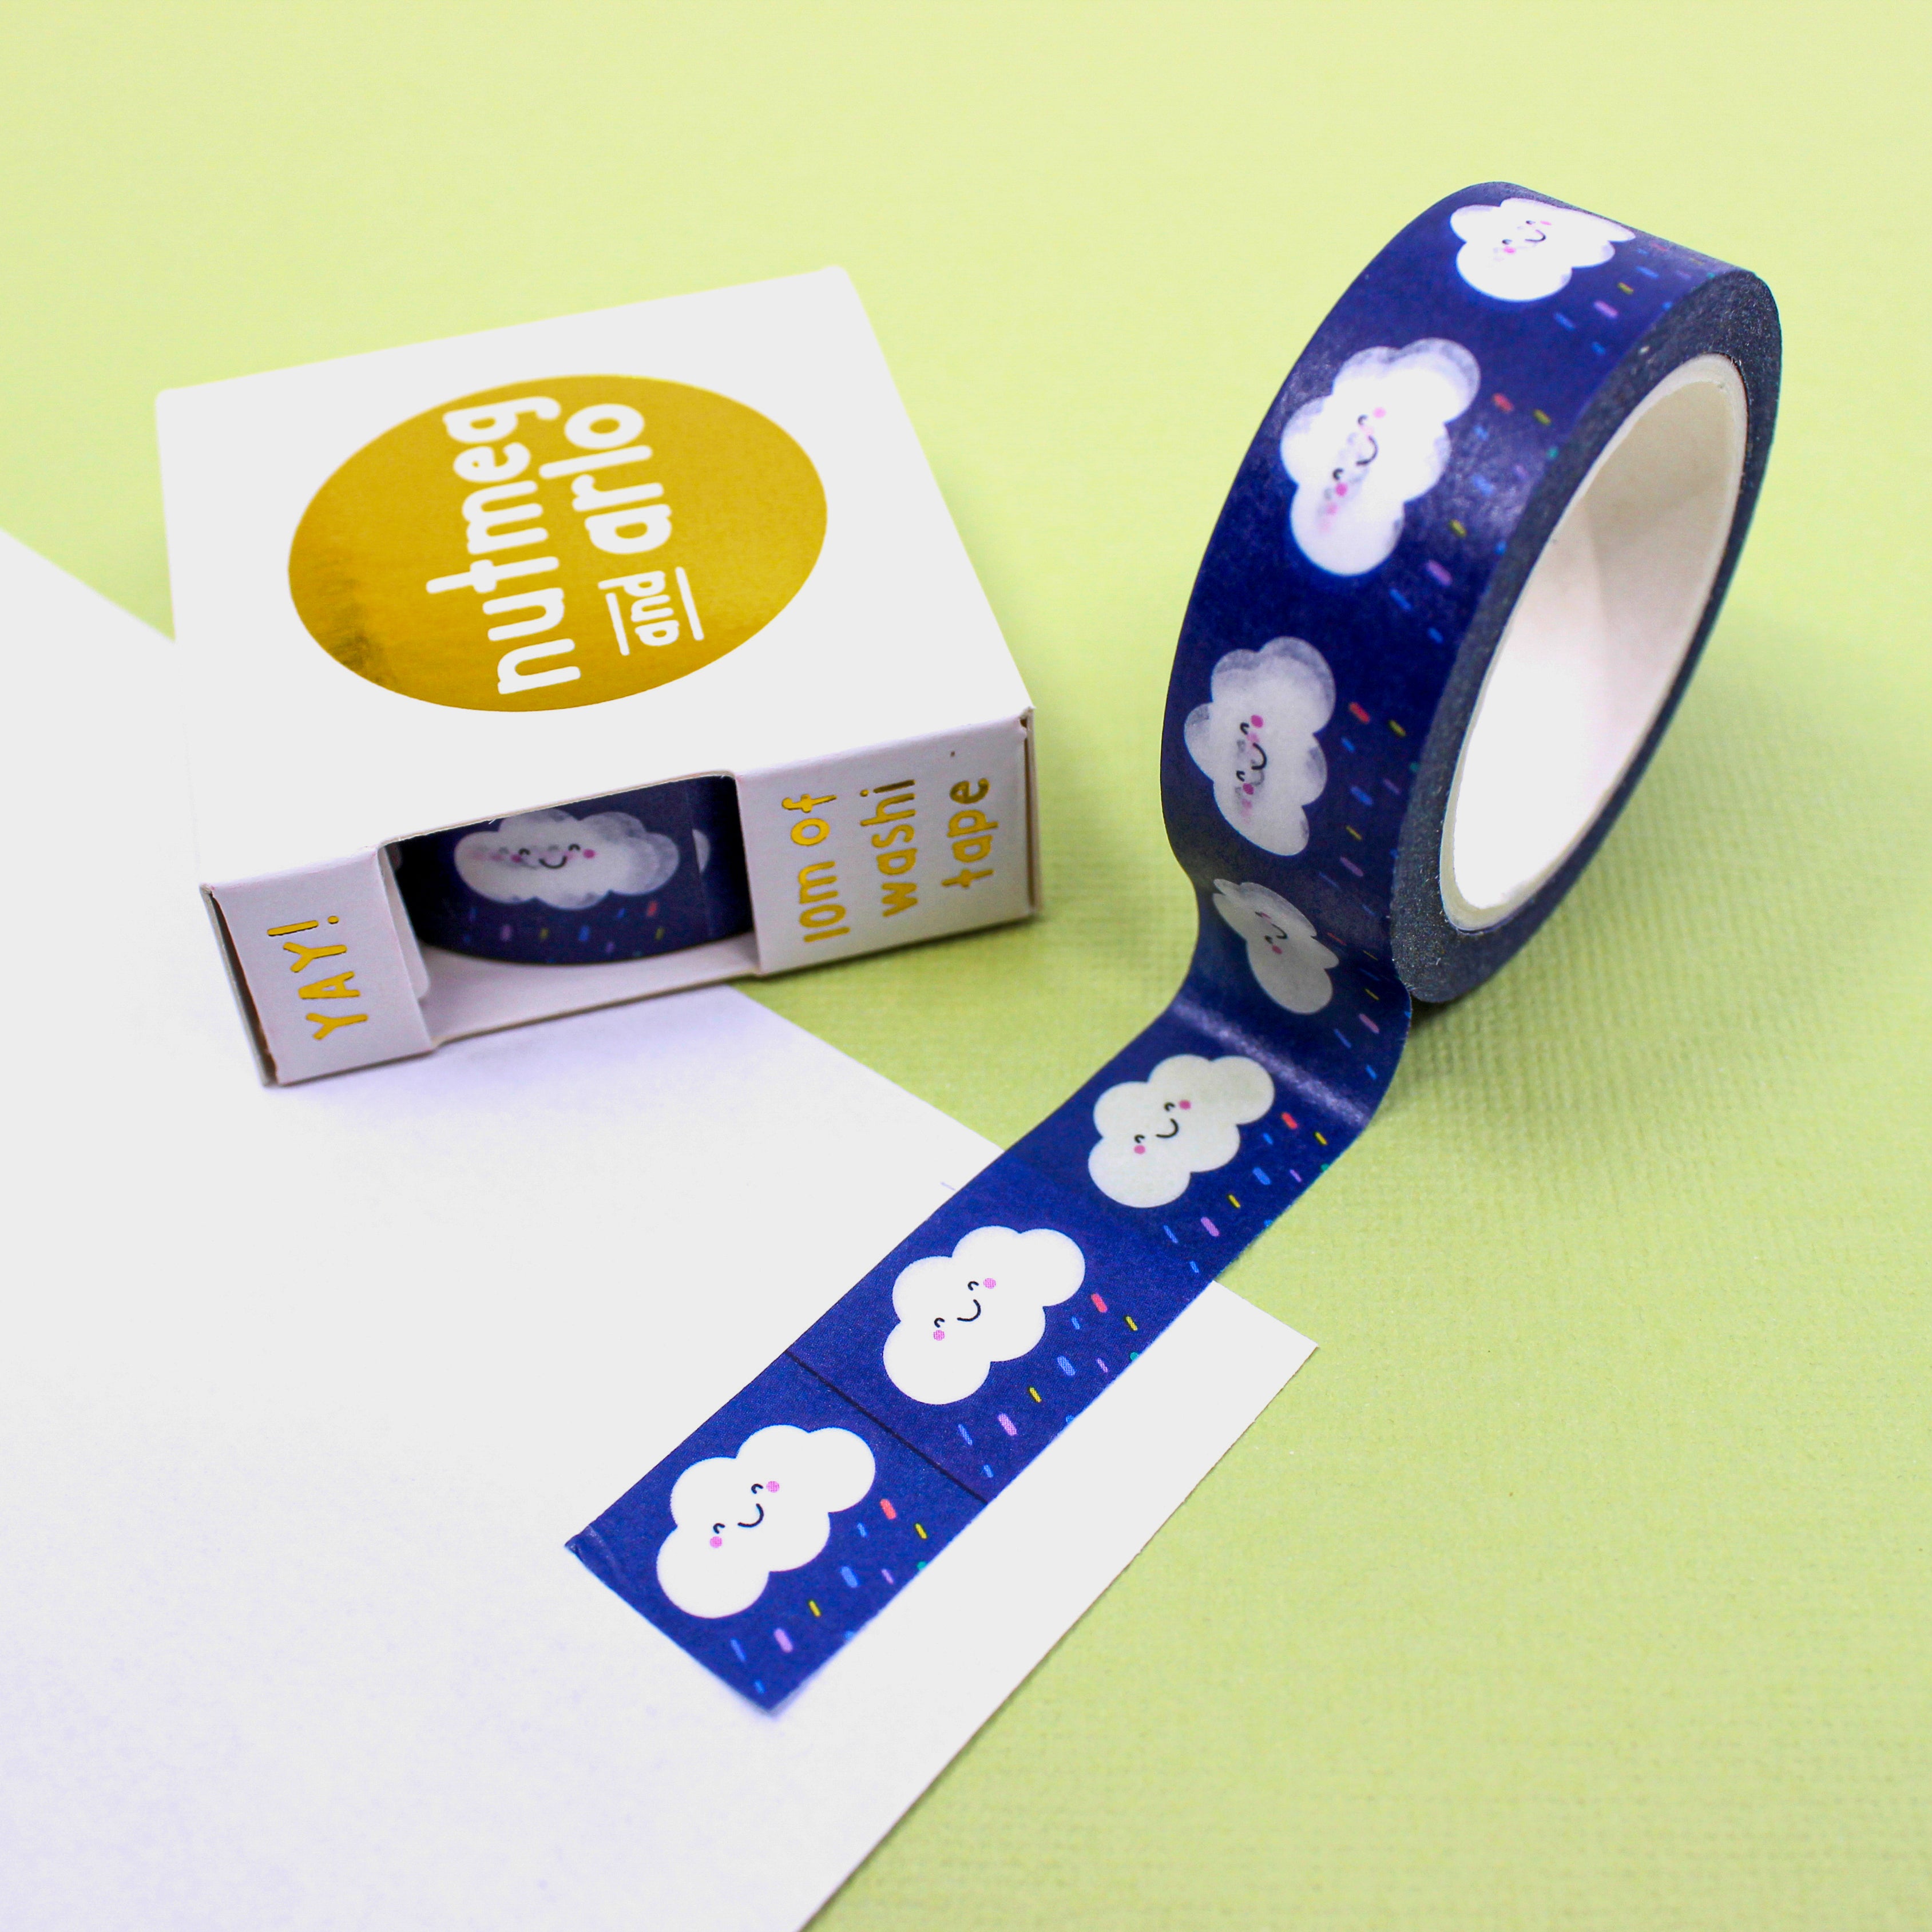 This is a white and blue clouds view themed washi tape from BBB Supplies Craft Shop